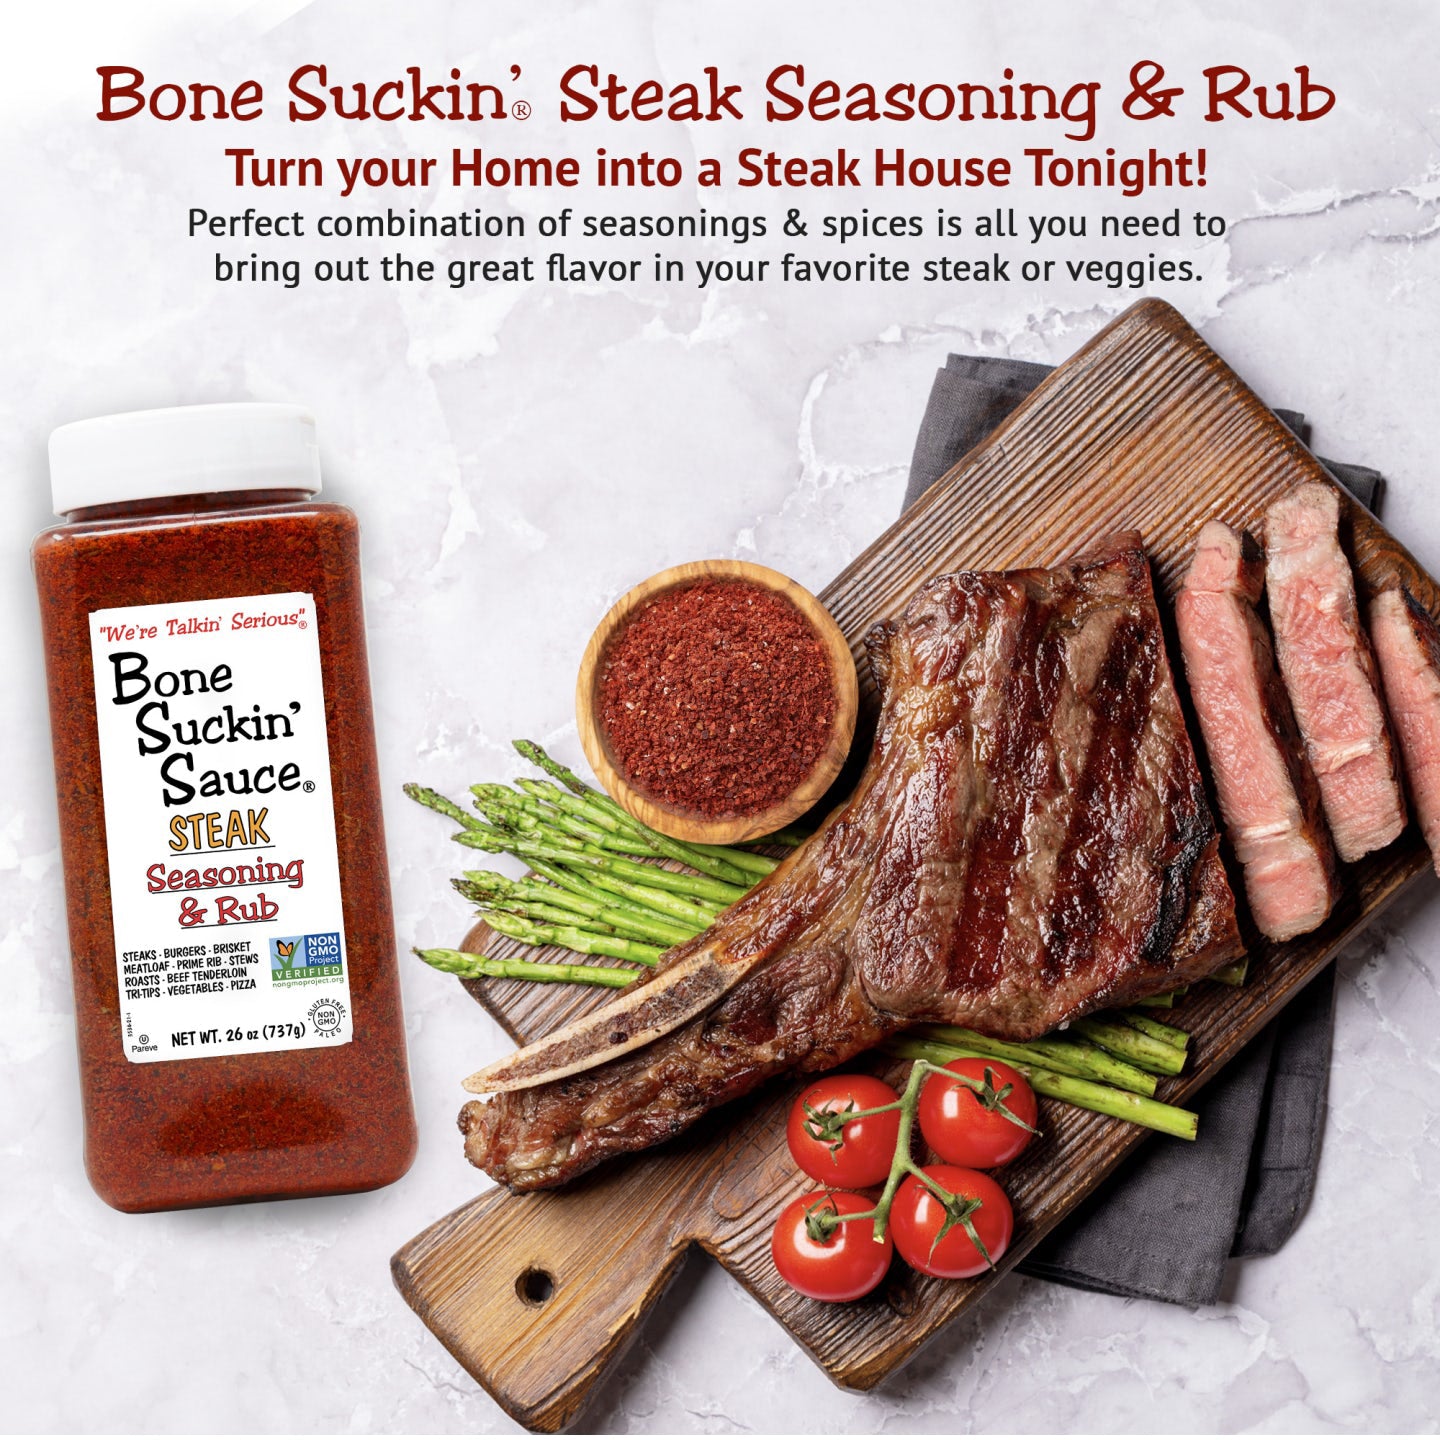 Bone Suckin' Steak Seasoning & Rub 26 oz. The perfect combination of seasonings and spices is all you need to bring out the great flavor in your favorite steak or veggies.